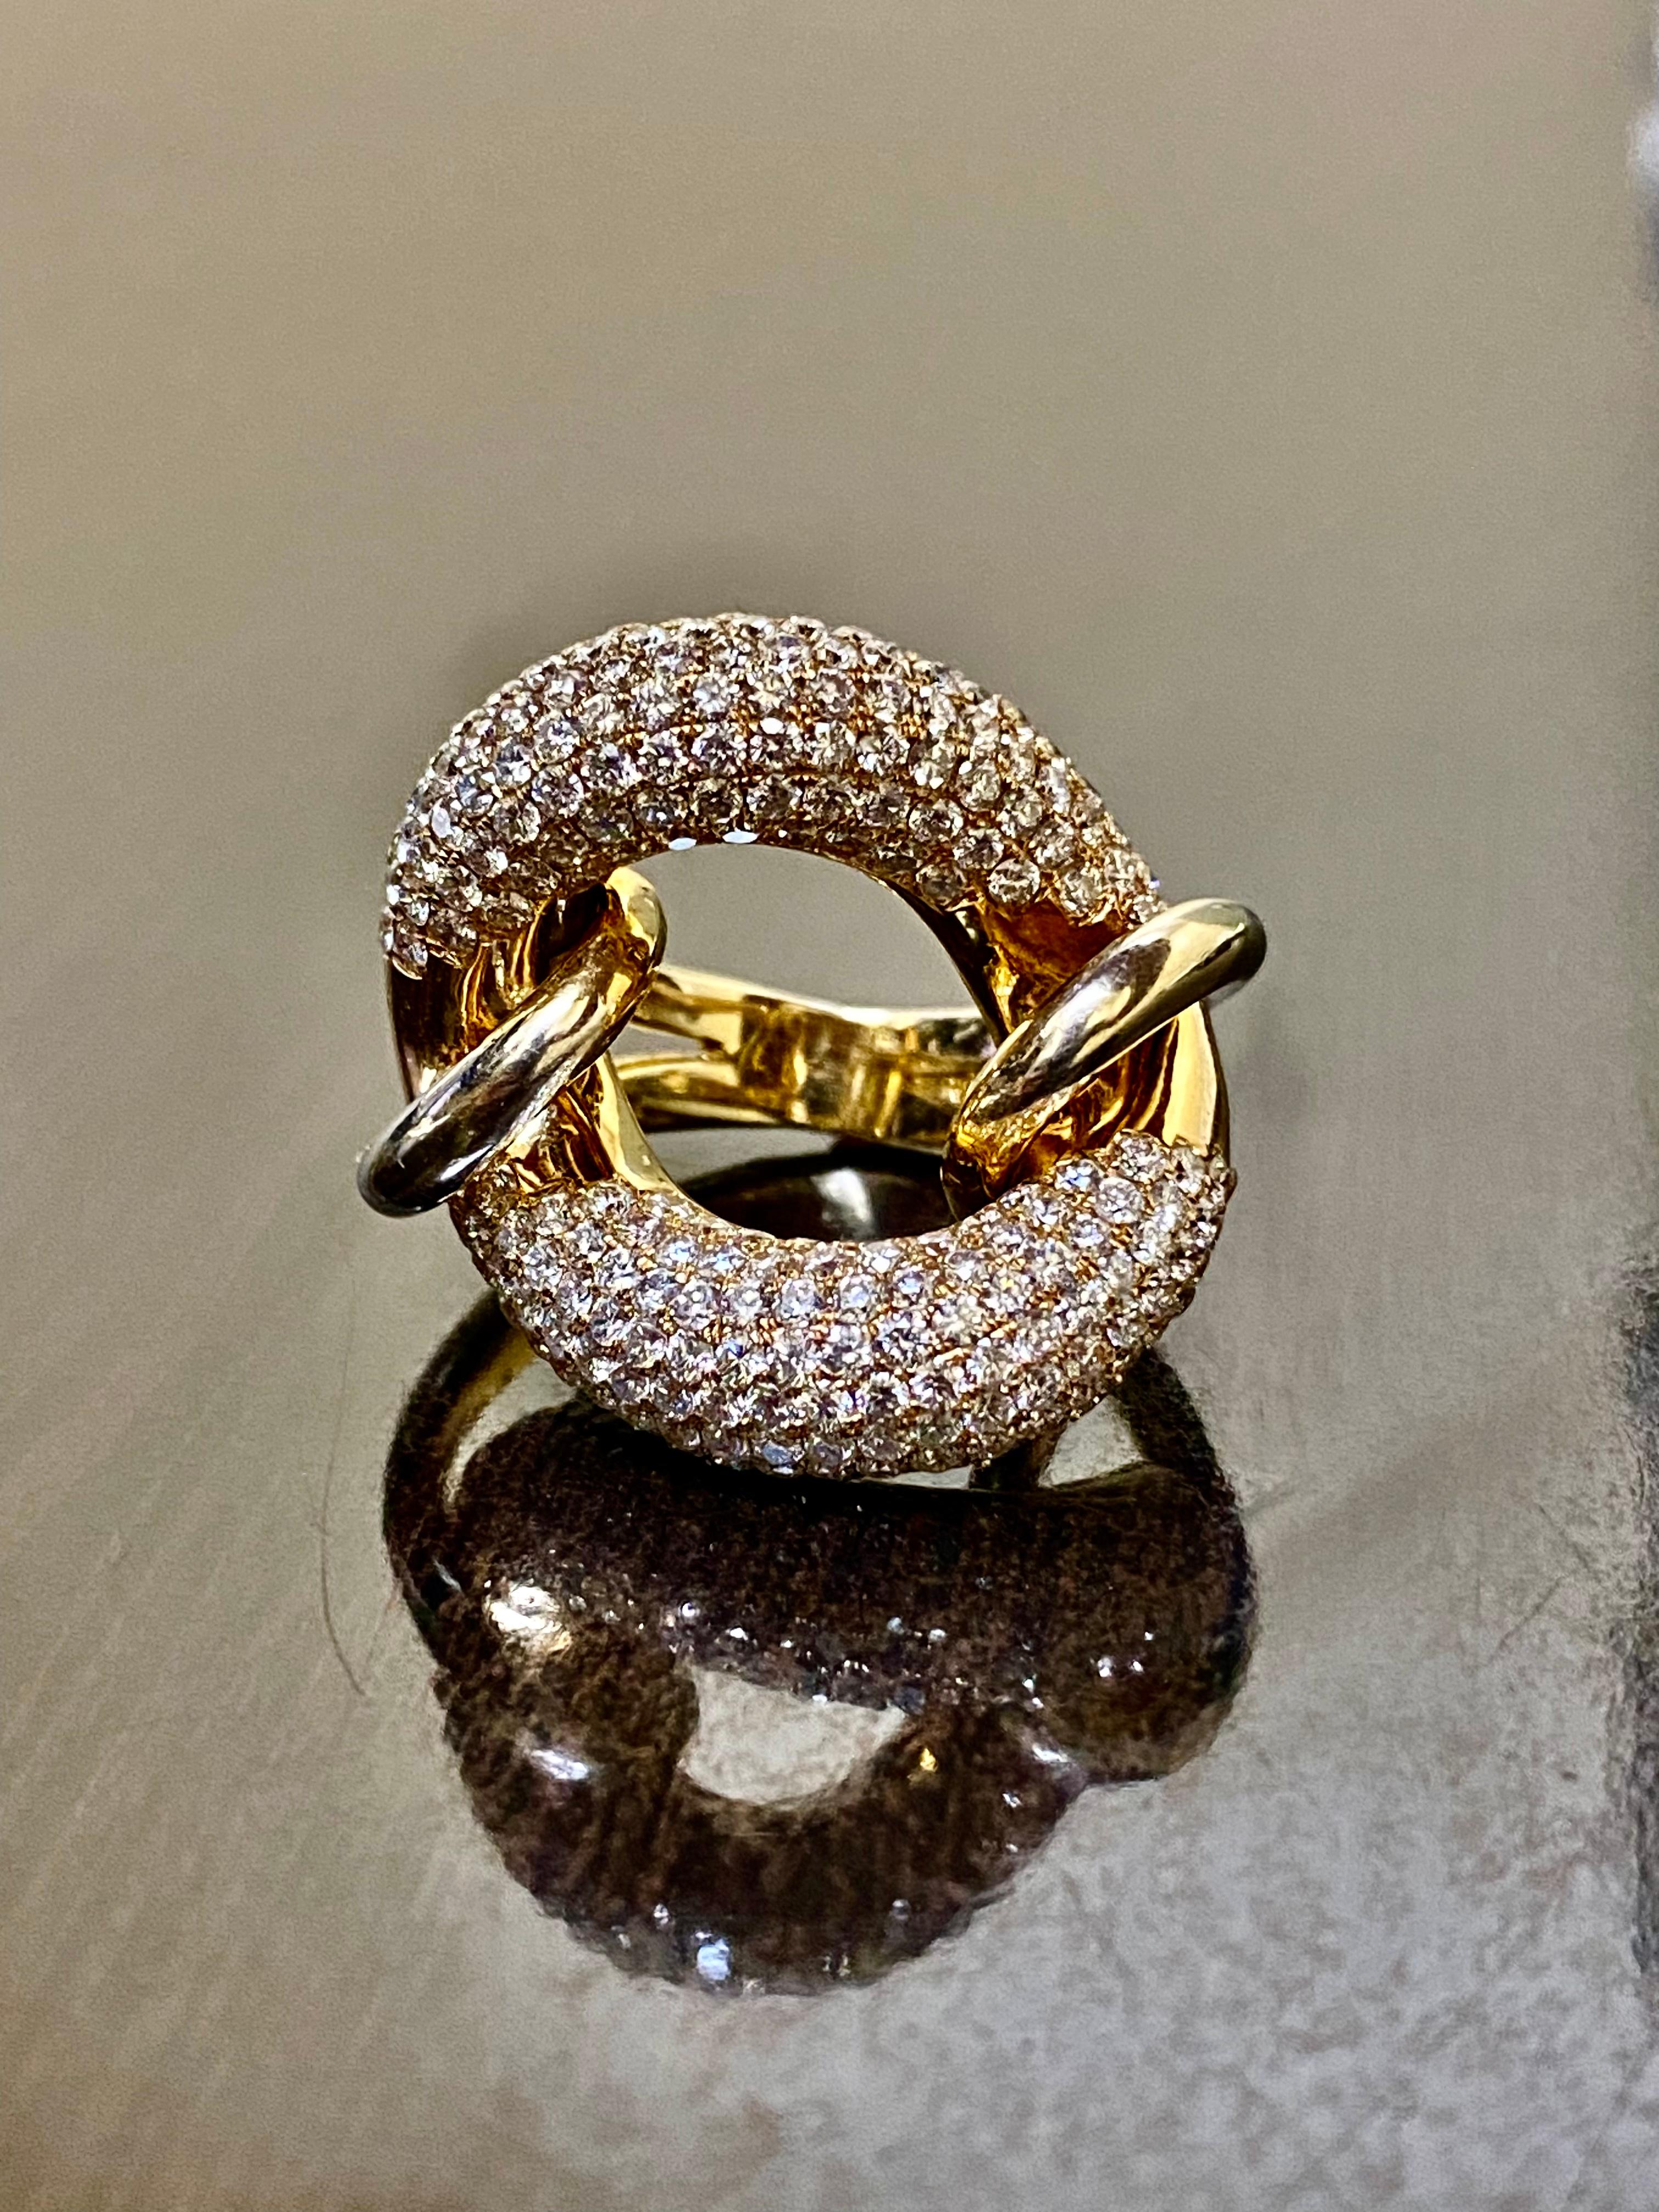 DeKara Designs Collection

Metal- 18K Yellow Gold, .750.  22 Grams

Stones- 256 Round Diamonds F-G Color VS1-VS2 Clarity, 6.14 Carats.

Feel like an aristocrat!

A one of a kind elegant and artistically crafted pave set seven row yin yang style